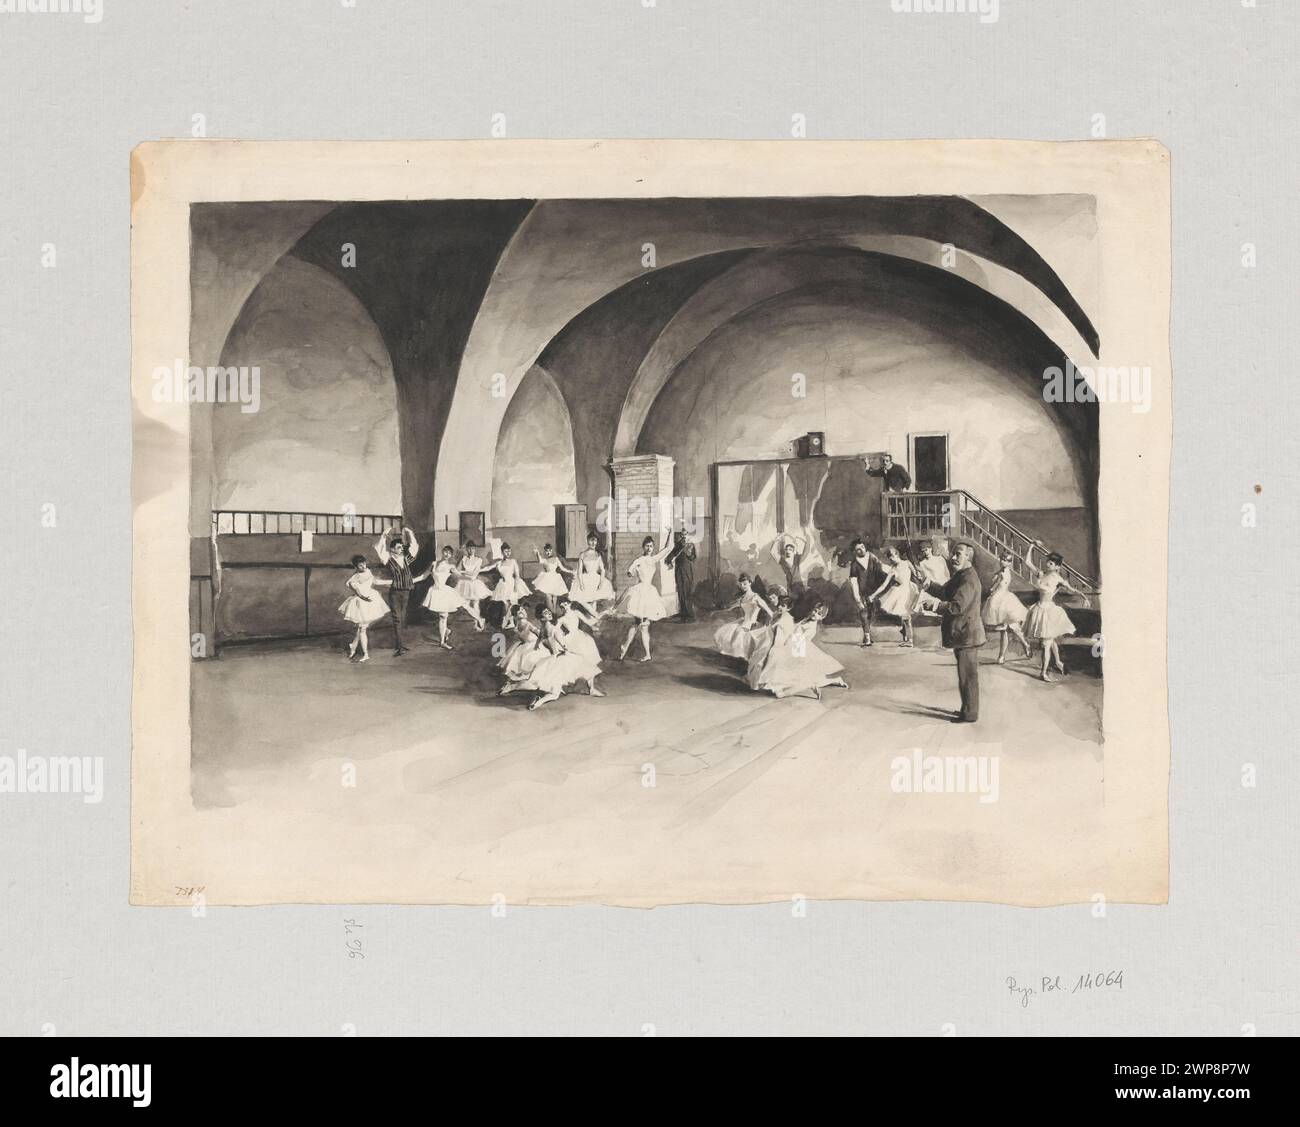 Ballet rehearsal room at the Grand Theater; Horseshoe, w Adys Aw (1866-1895); 1890 (1890-00-00-1890-00-00);J Whatman (filigree), meunier, Hipolit Edward (1825-1898), Meunier, Hipolit Edward (1825-1898)-iconography, Méyet, Leopold (1850-1912), Méyet, Leopold (1850-1912)-collection, Méyet, Leopold (1850-1912) - seal, Wielki Theater (Warsaw), Weekly Ilustrowany (Warsaw - magazine - 1859-1939), Weekly Ilustrowany (Warsaw - magazine - 1859-1939) - Illustration, Warsaw (Masovian Voivodeship), artists, artists, Ballet (theater), gift (provenance), Poland (culture), portraits of dancers, collective po Stock Photo